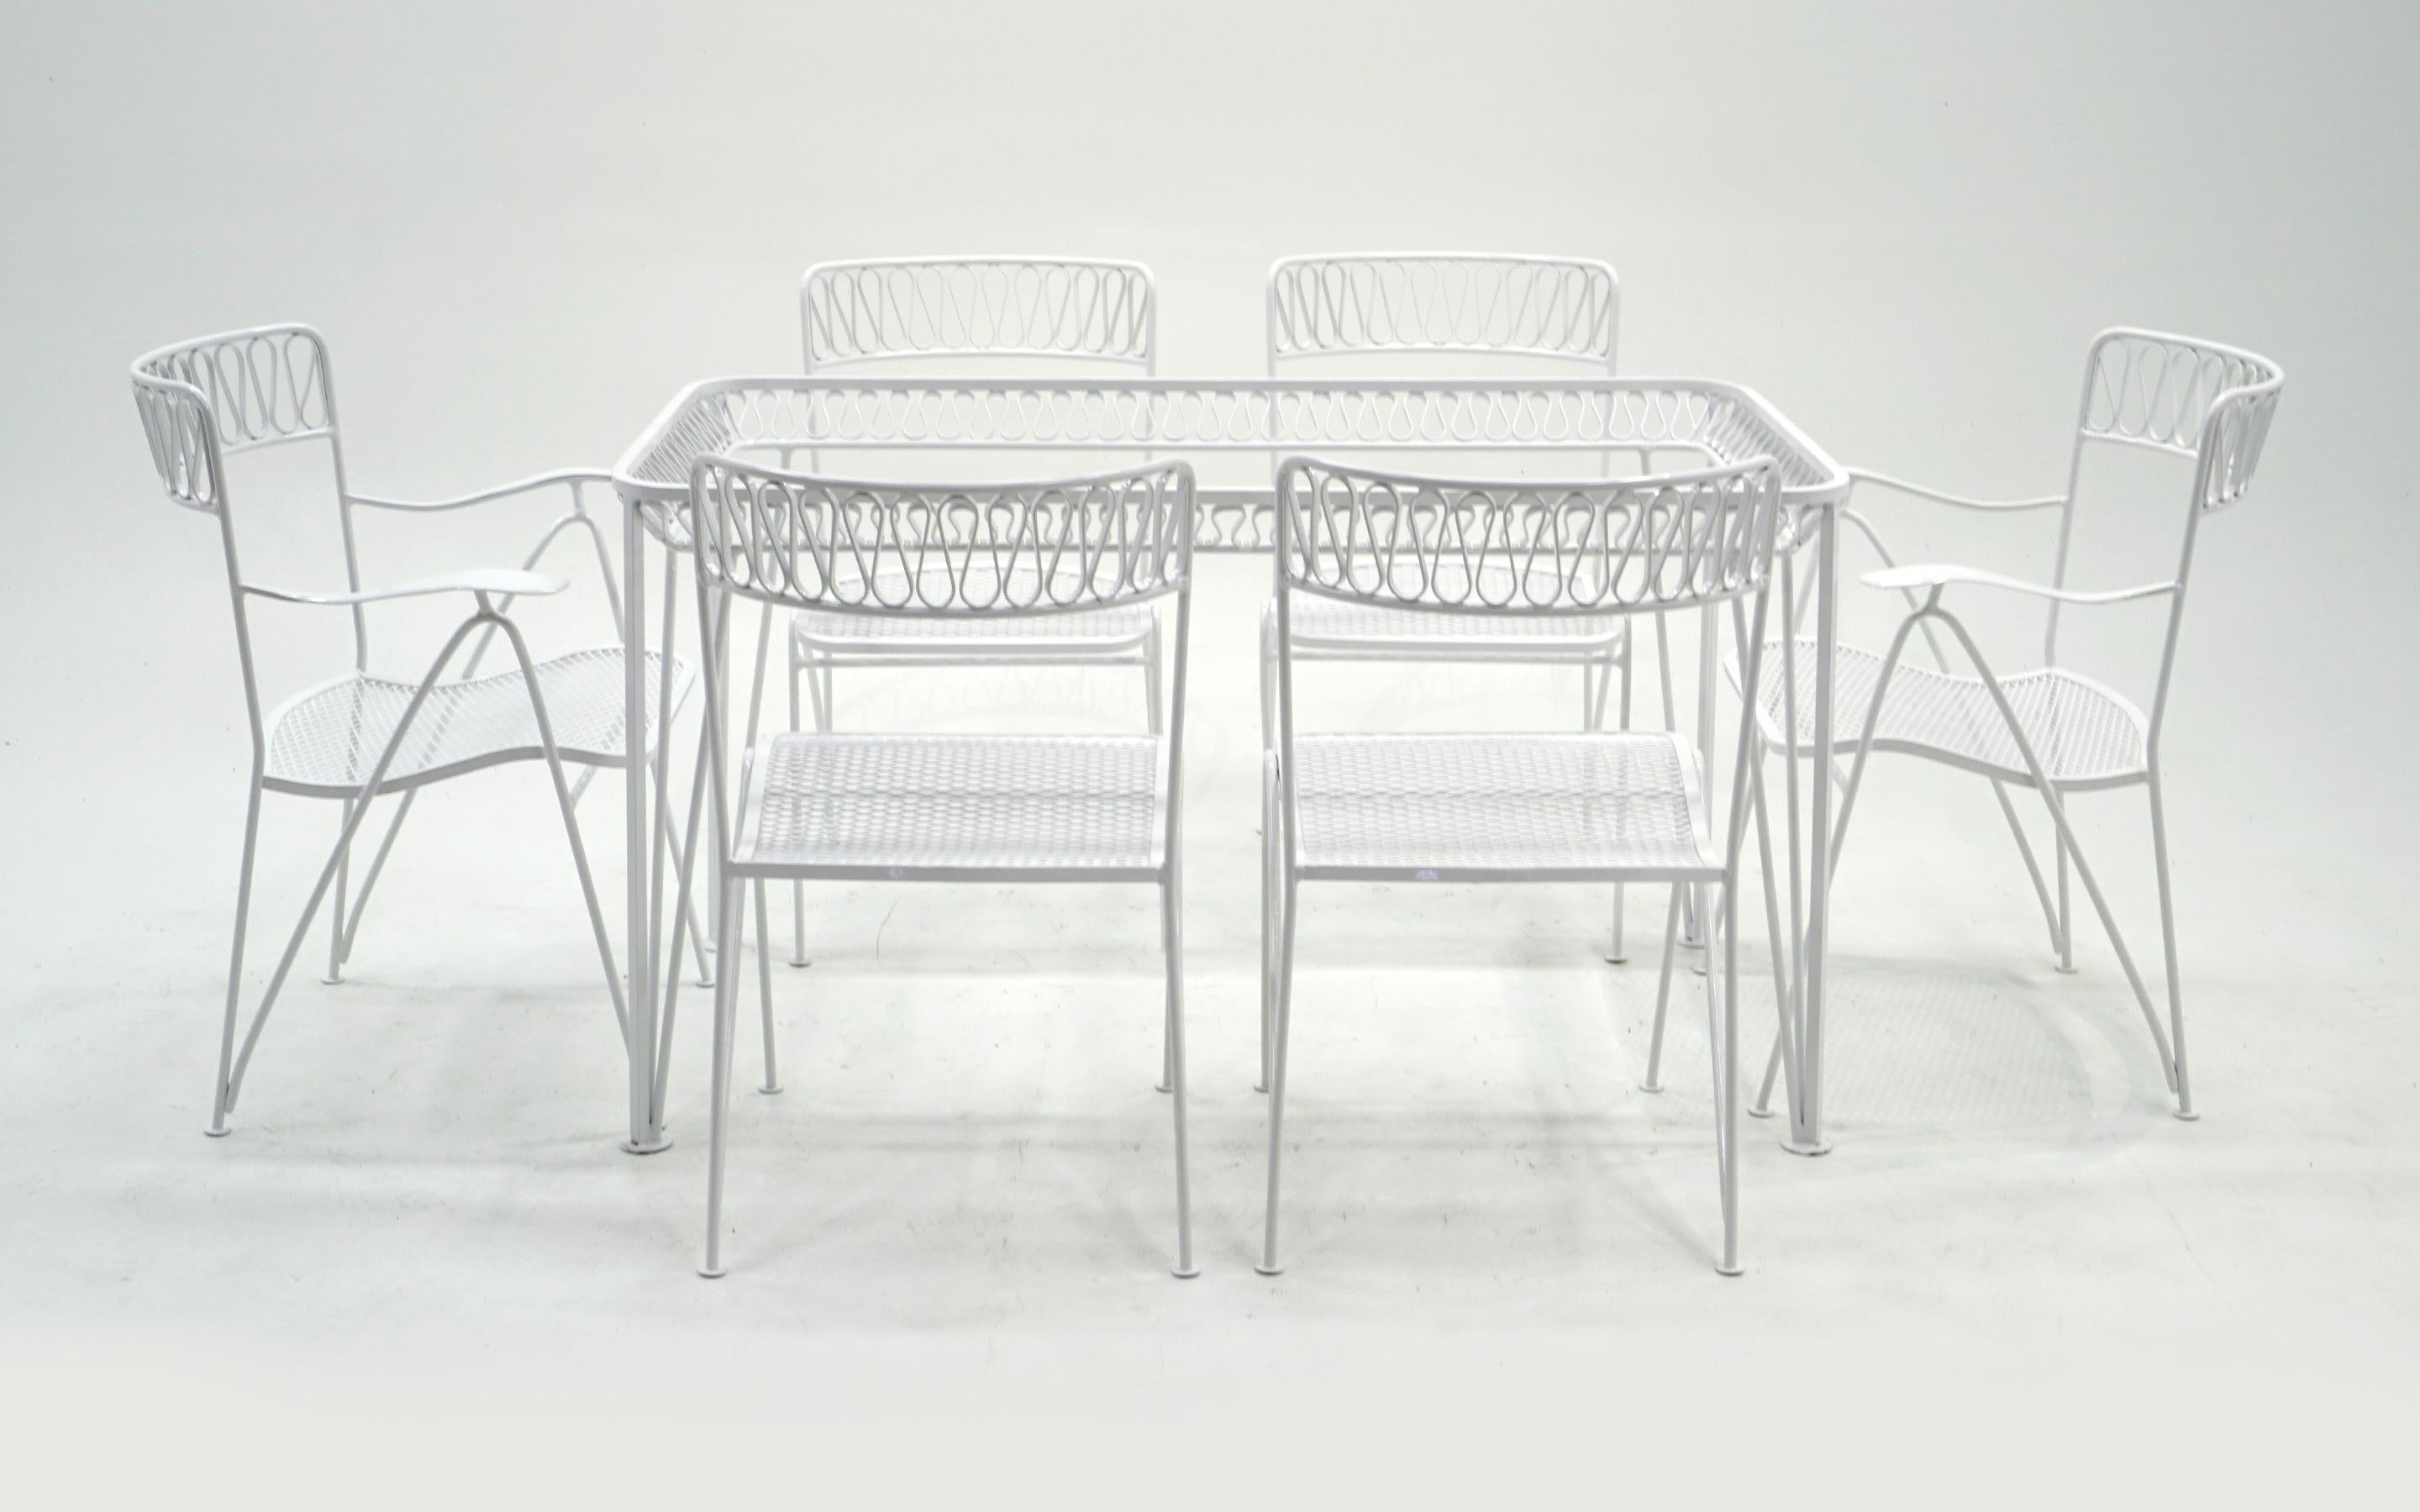 Patio/pool dining table and 6 chairs by John Salterini. Heavy wrought iron construction and just professionally media blasted and powder coated in a smooth satin white finish. The chairs are very comfortable. Sold without the glass top.
Measures: